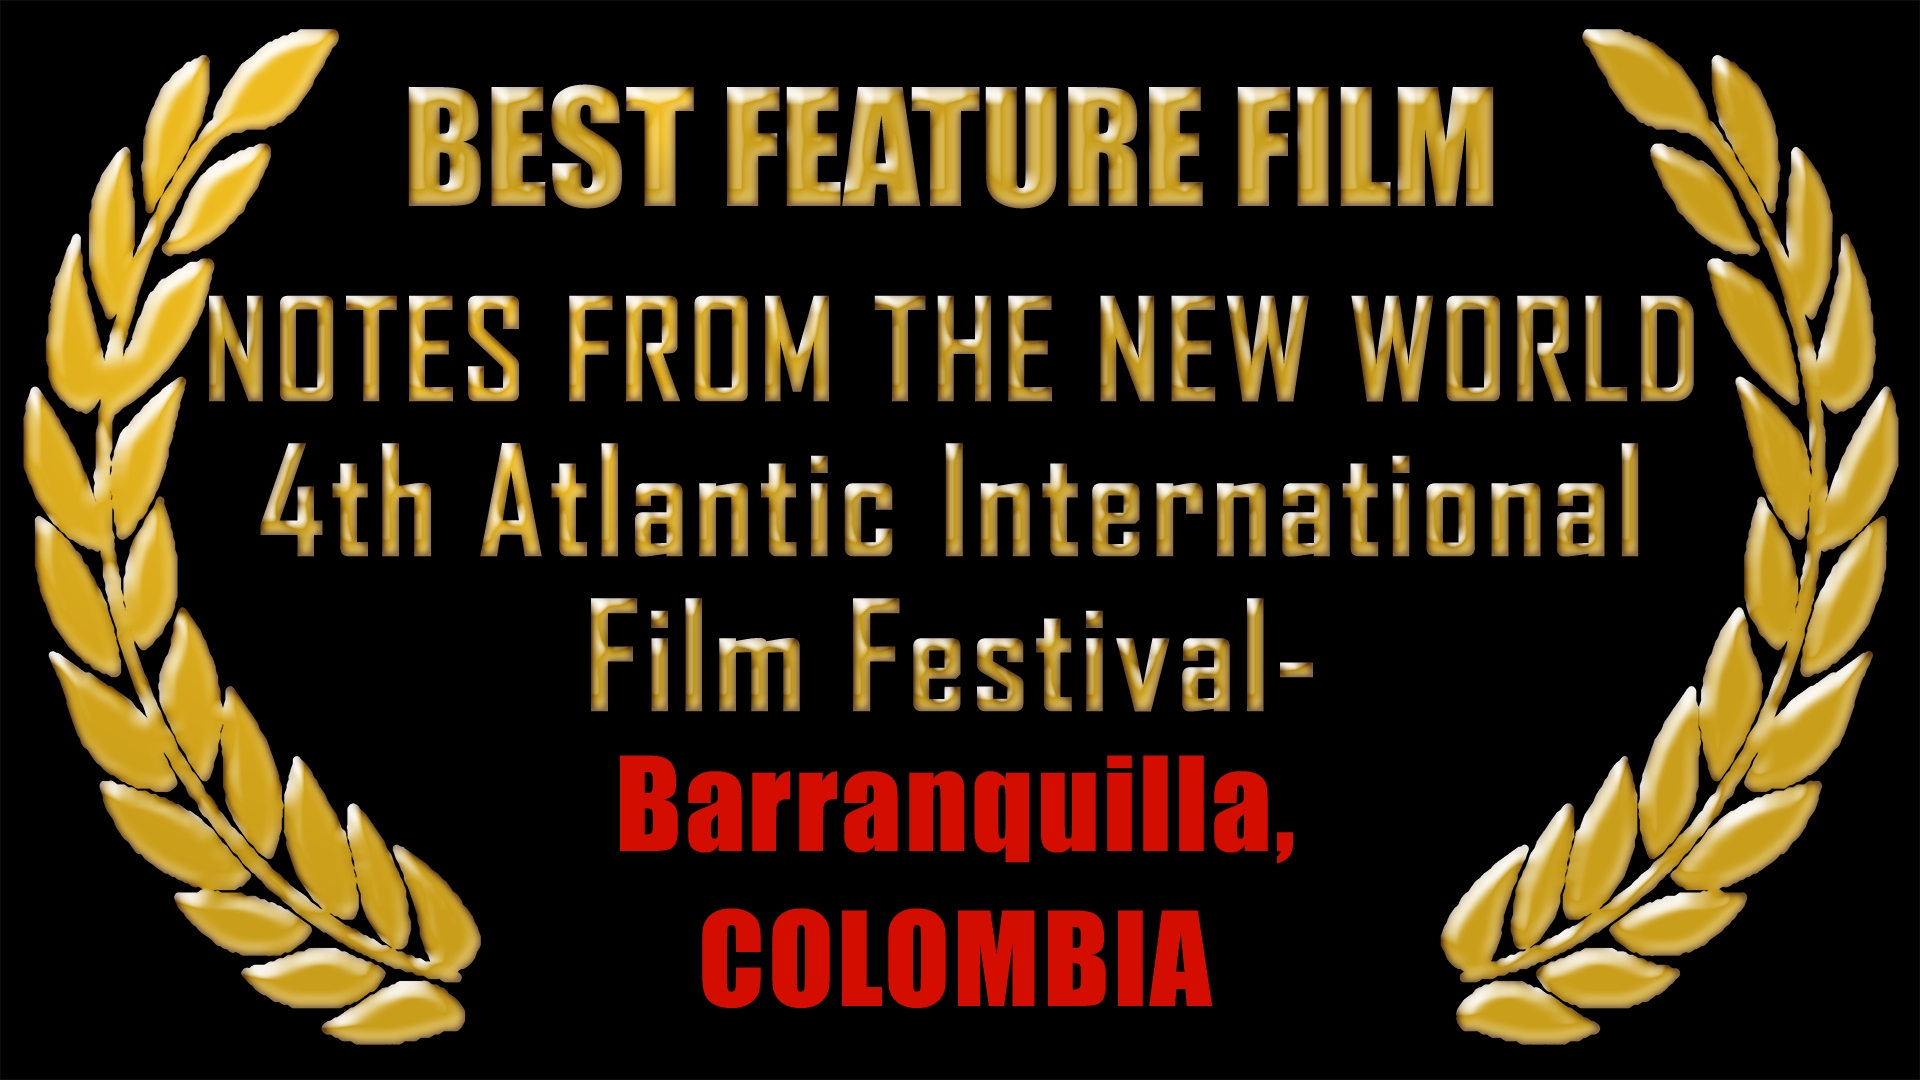 Best Feature Film, Barranquilla - Colombia